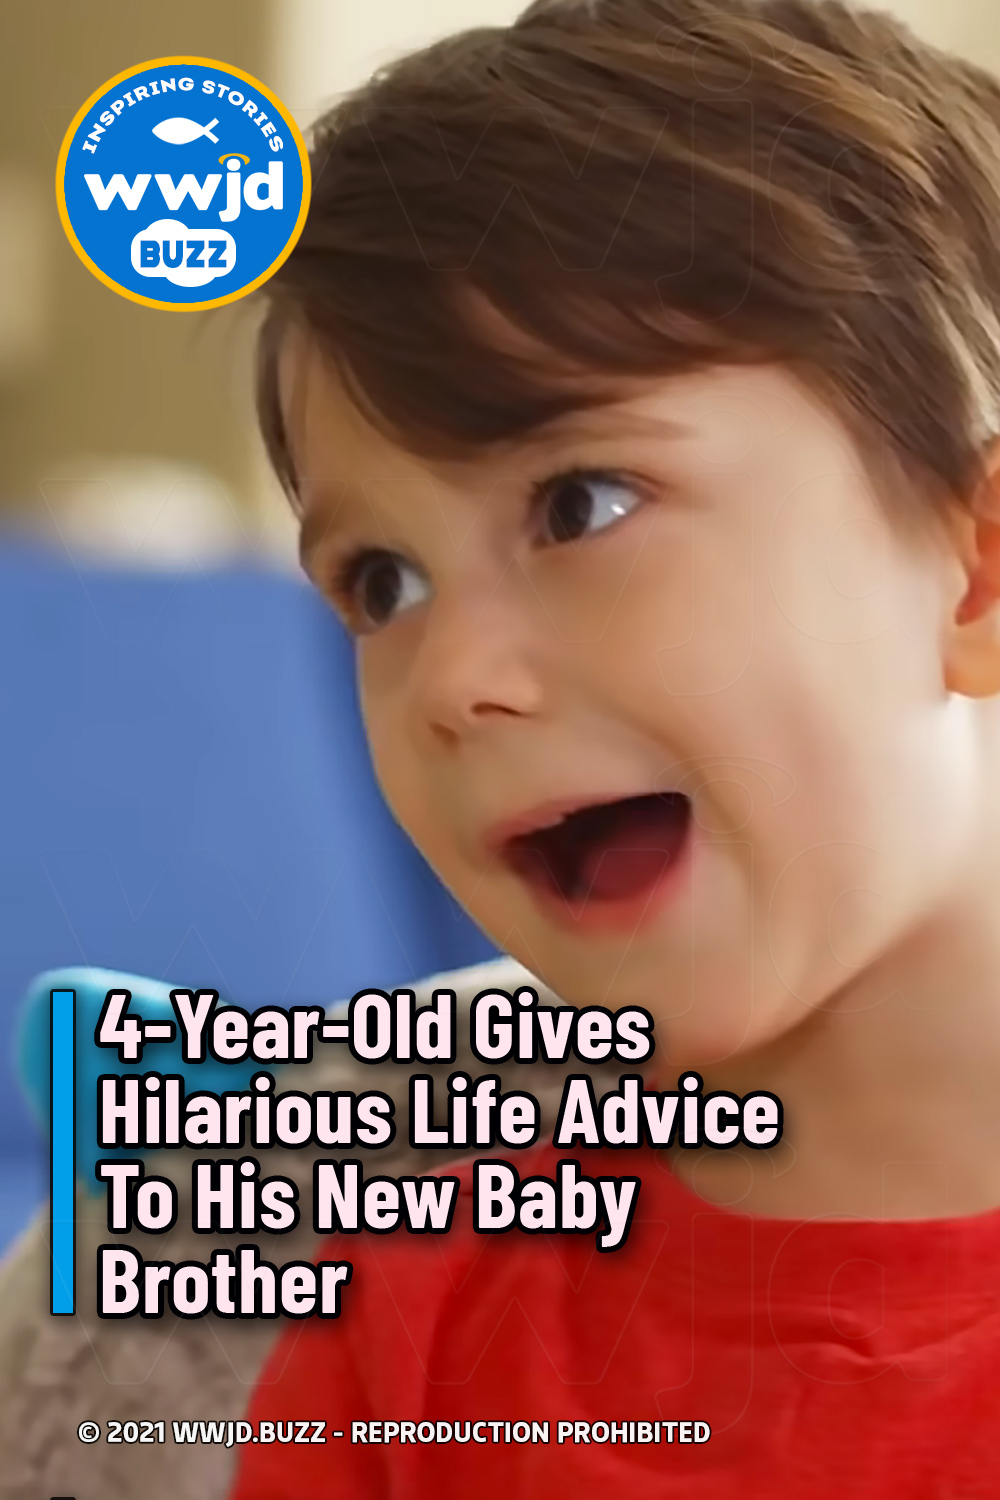 4-Year-Old Gives Hilarious Life Advice To His New Baby Brother